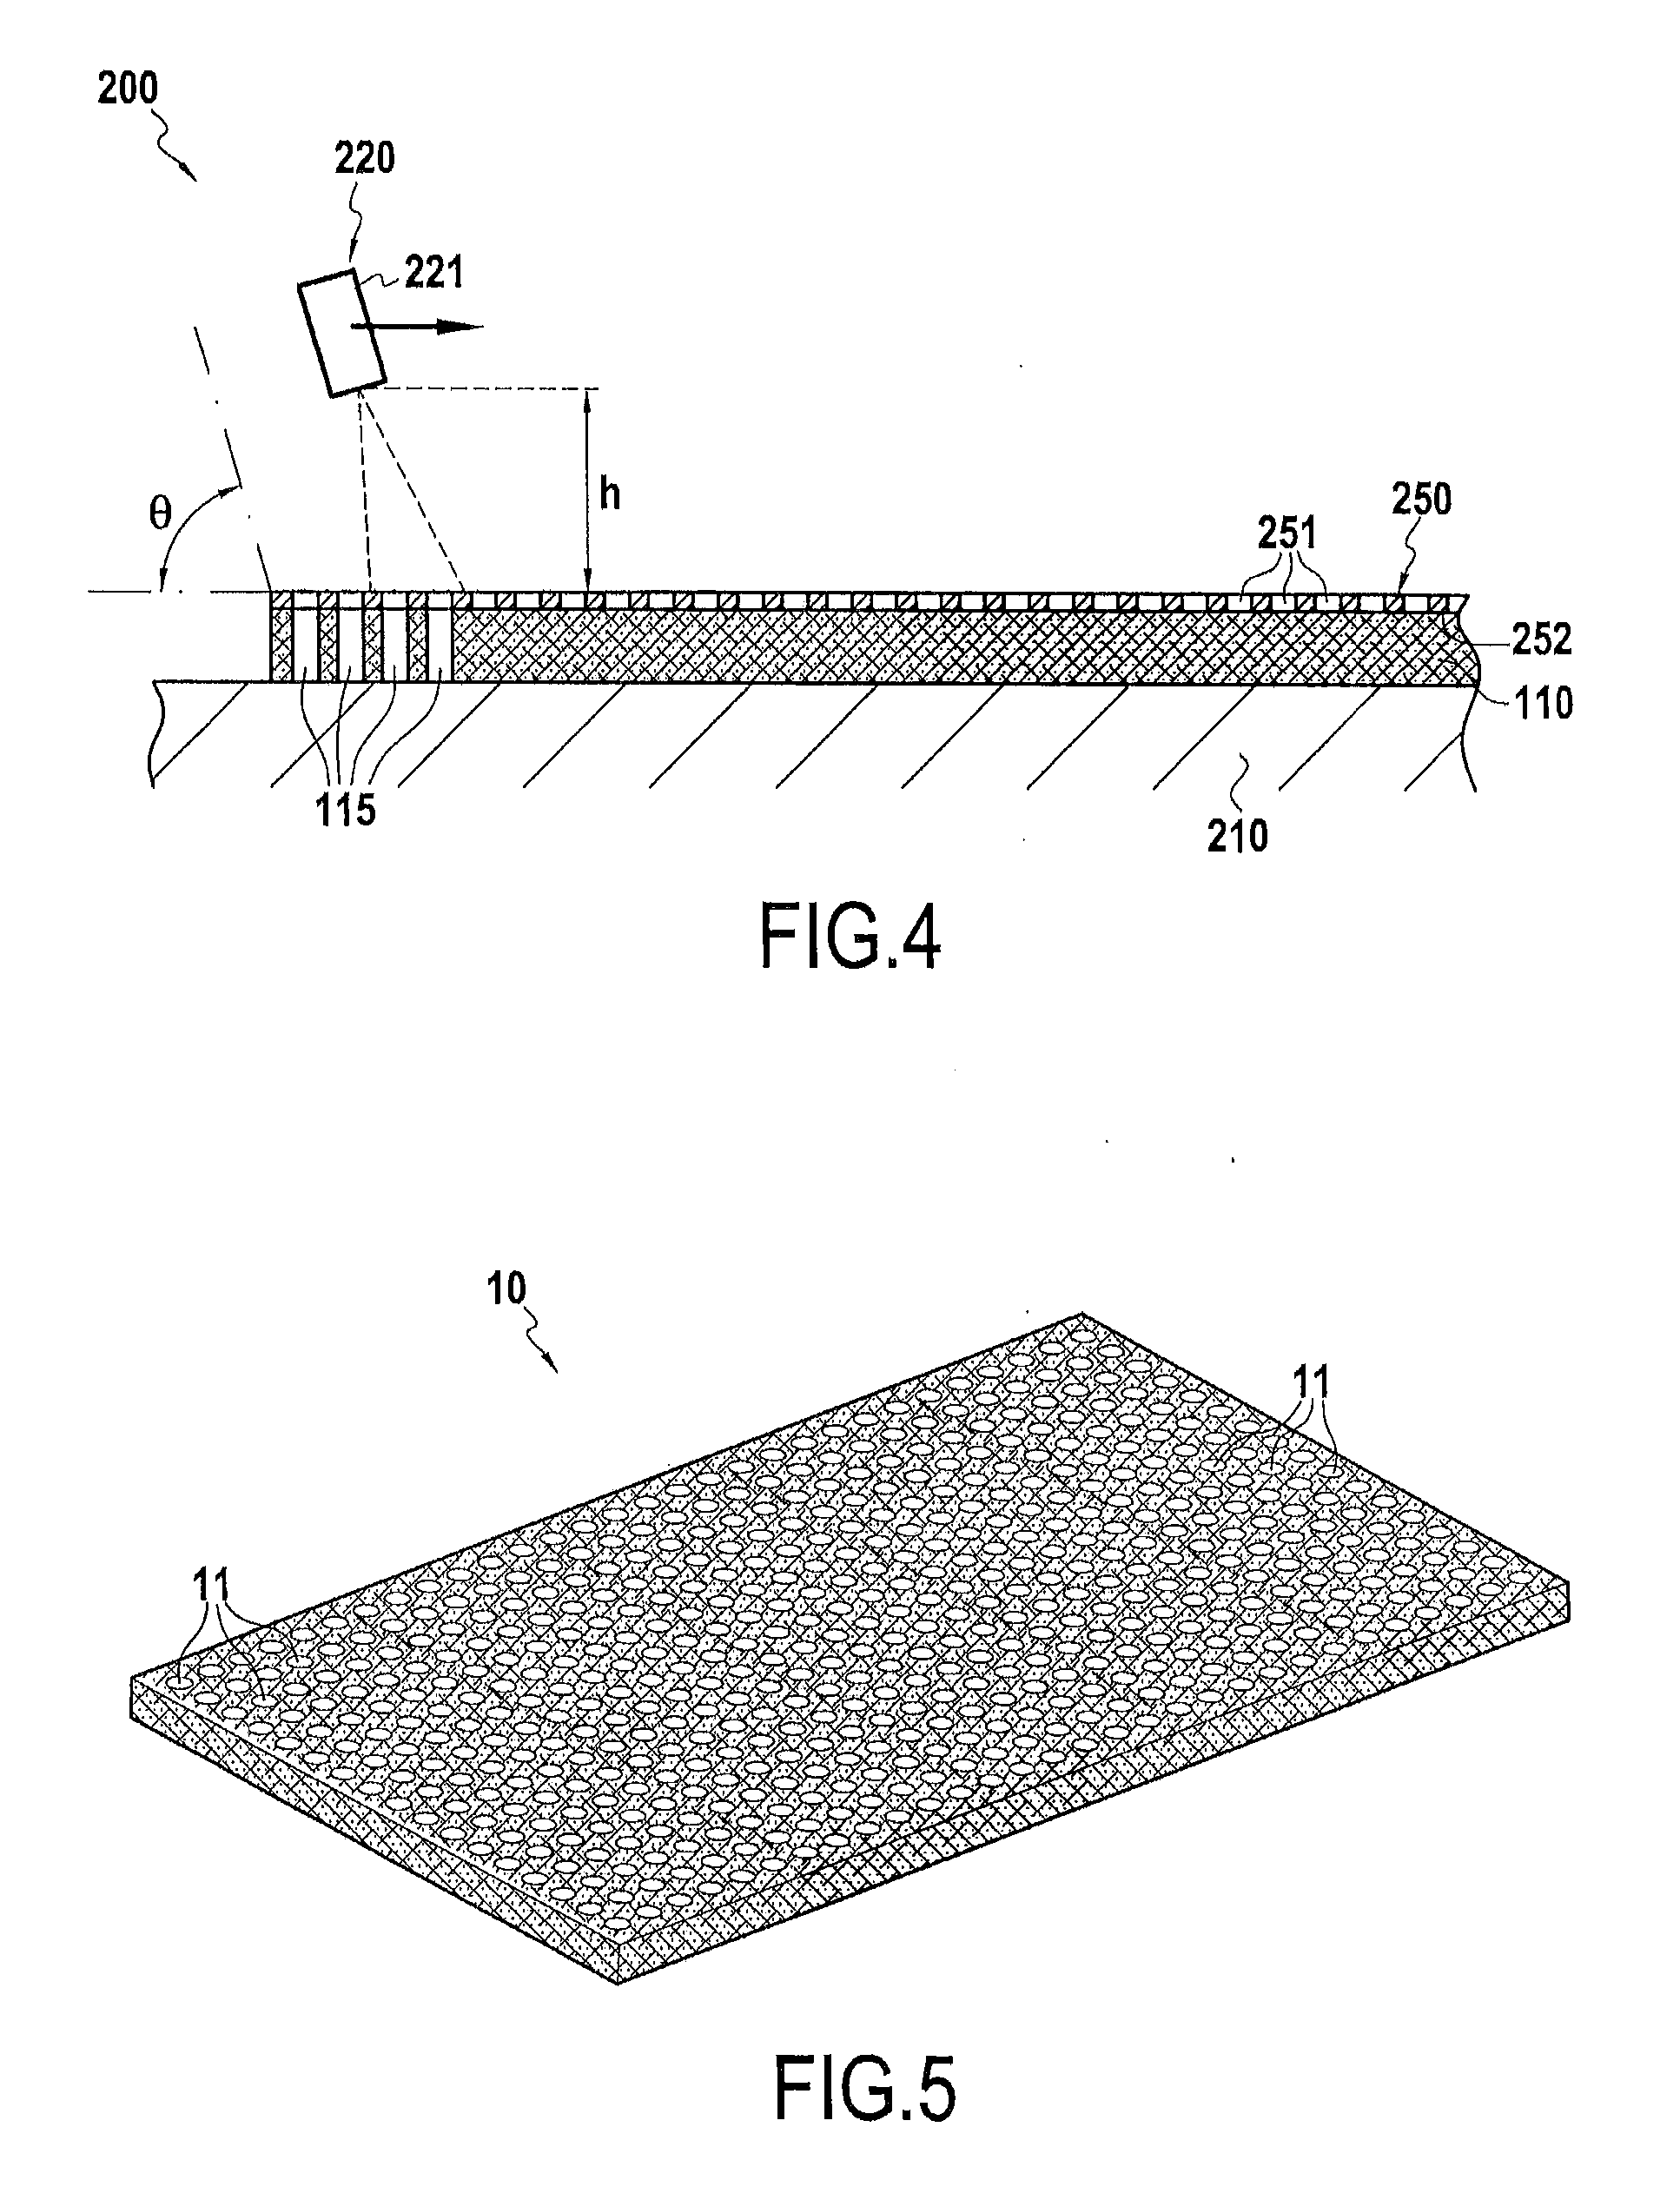 Process for manufacturing a multiperforated composite part